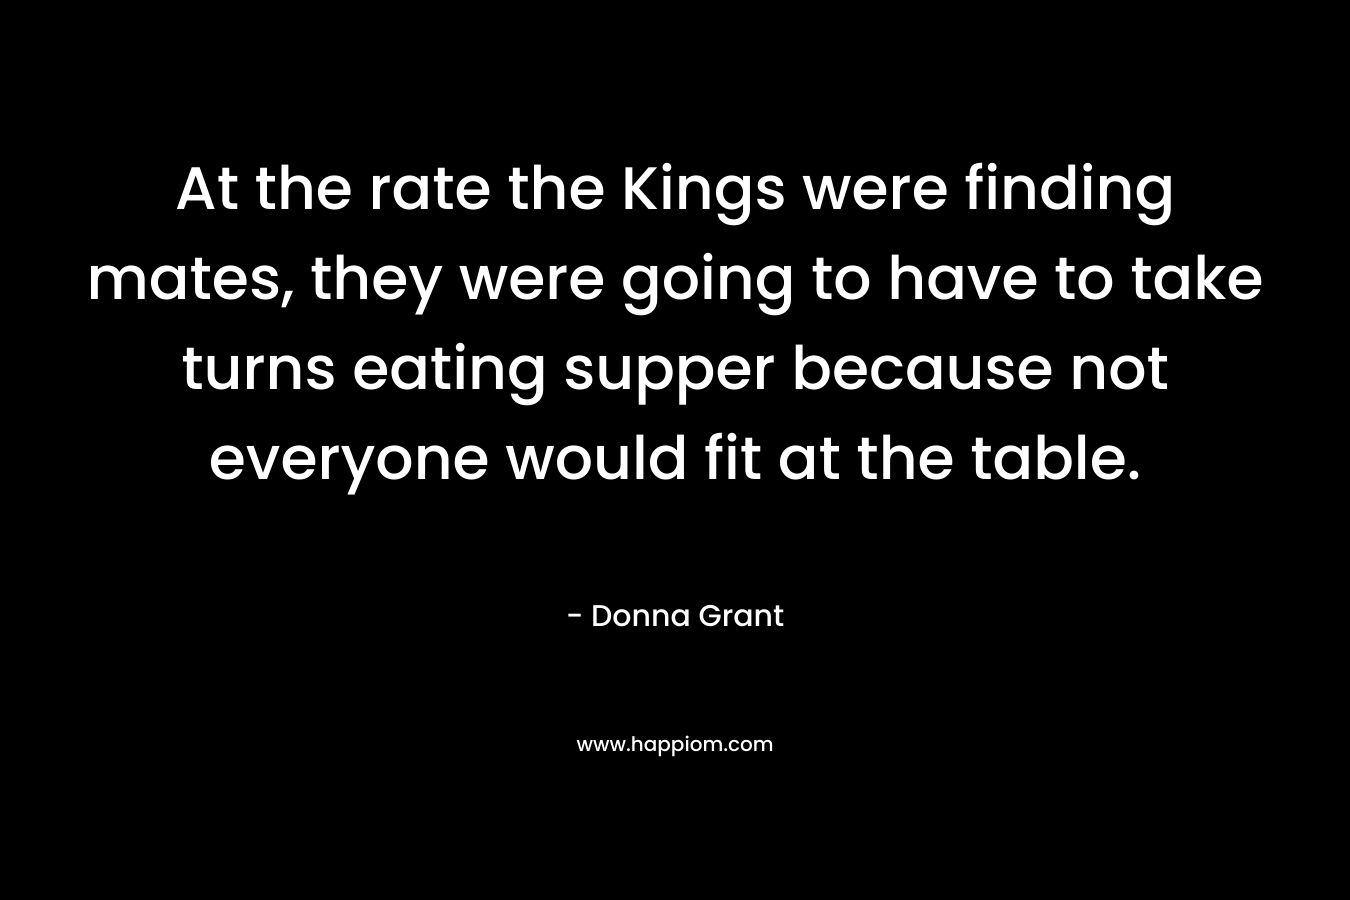 At the rate the Kings were finding mates, they were going to have to take turns eating supper because not everyone would fit at the table. – Donna Grant